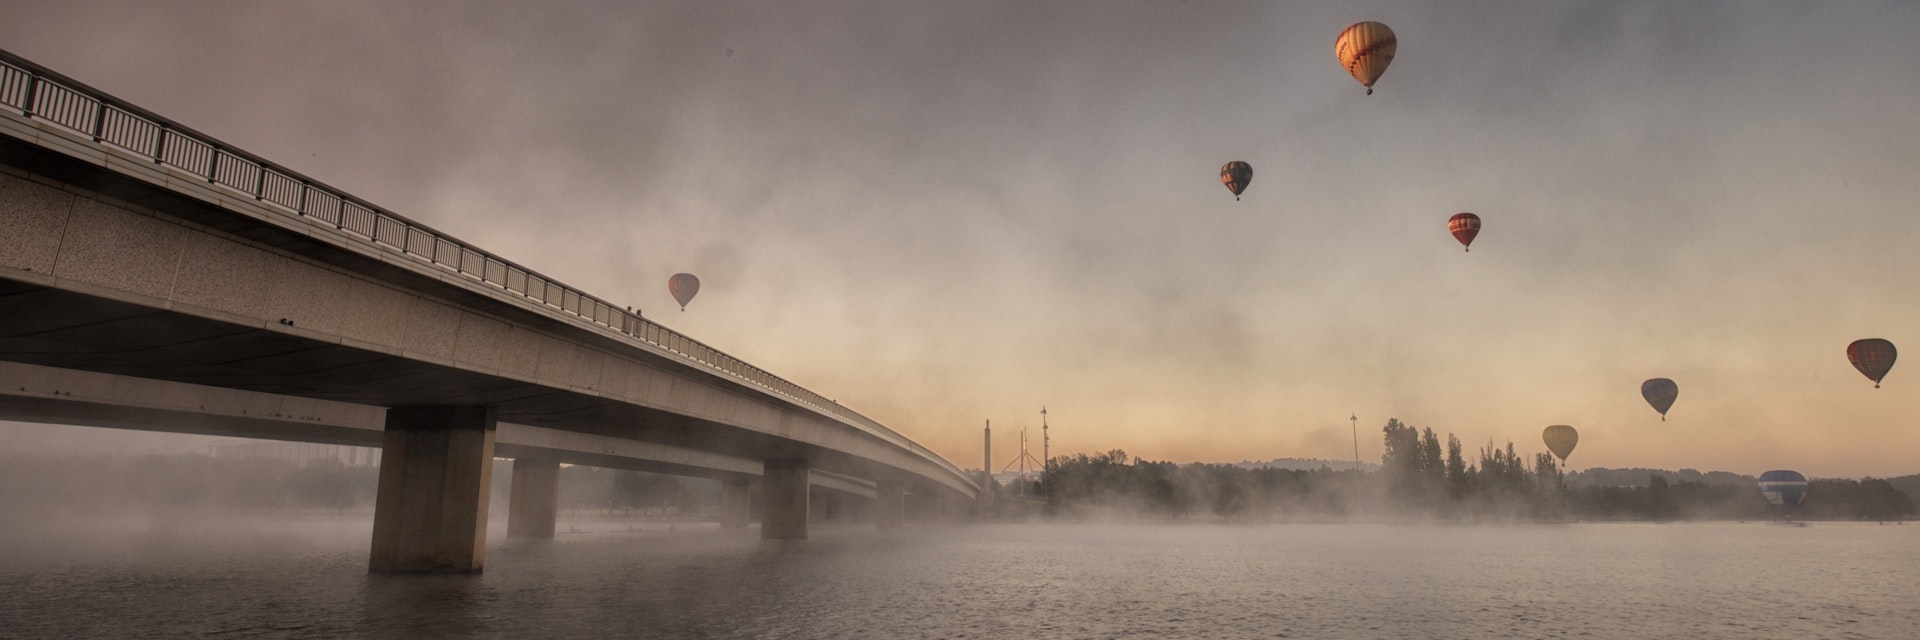 500px Photo ID: 116785003 - Balloon in Canberra